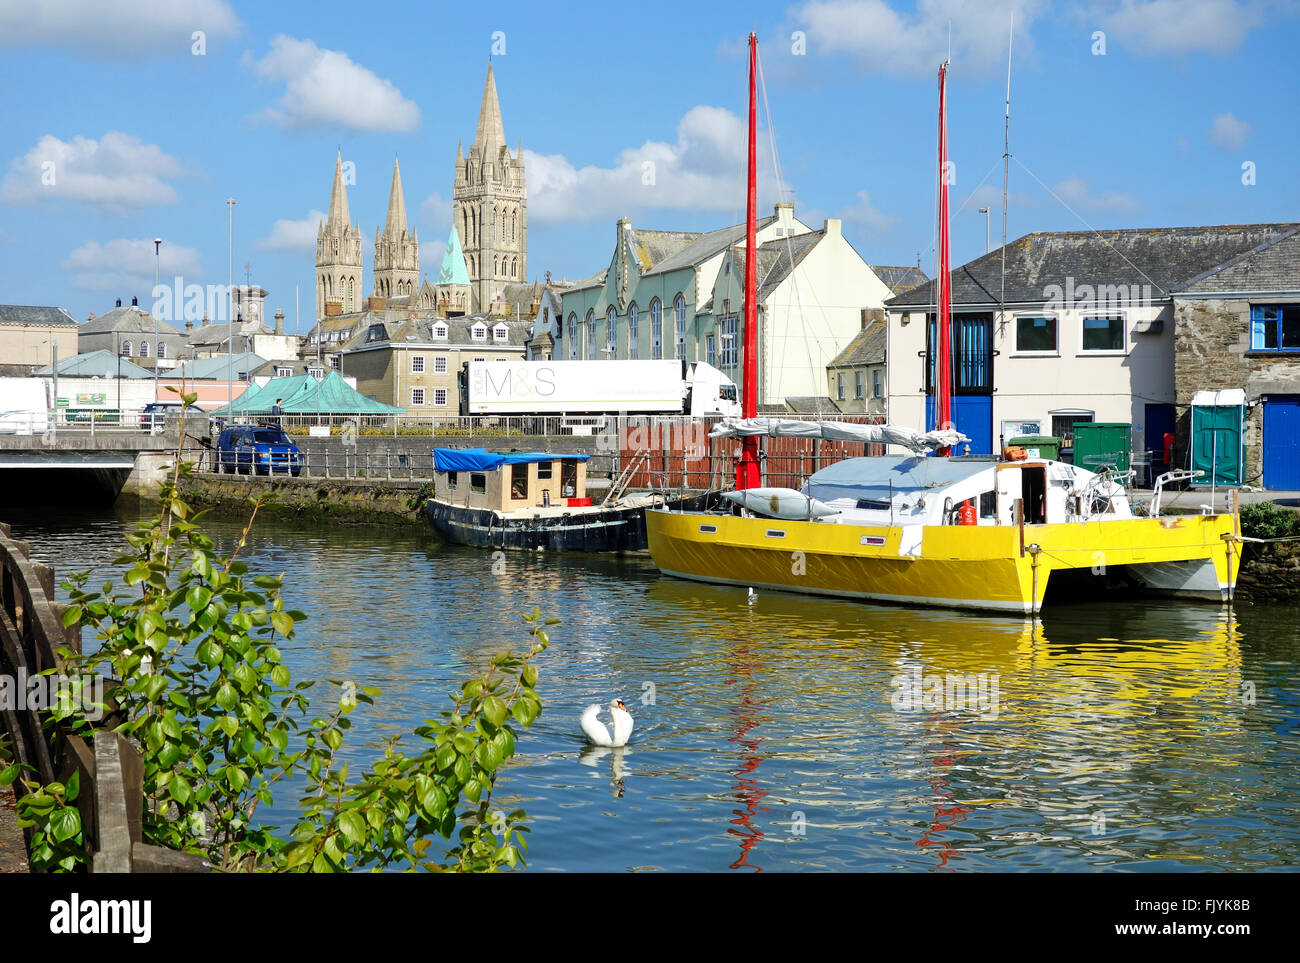 The river Fal in the city of Truro, Cornwall, England, UK Stock Photo